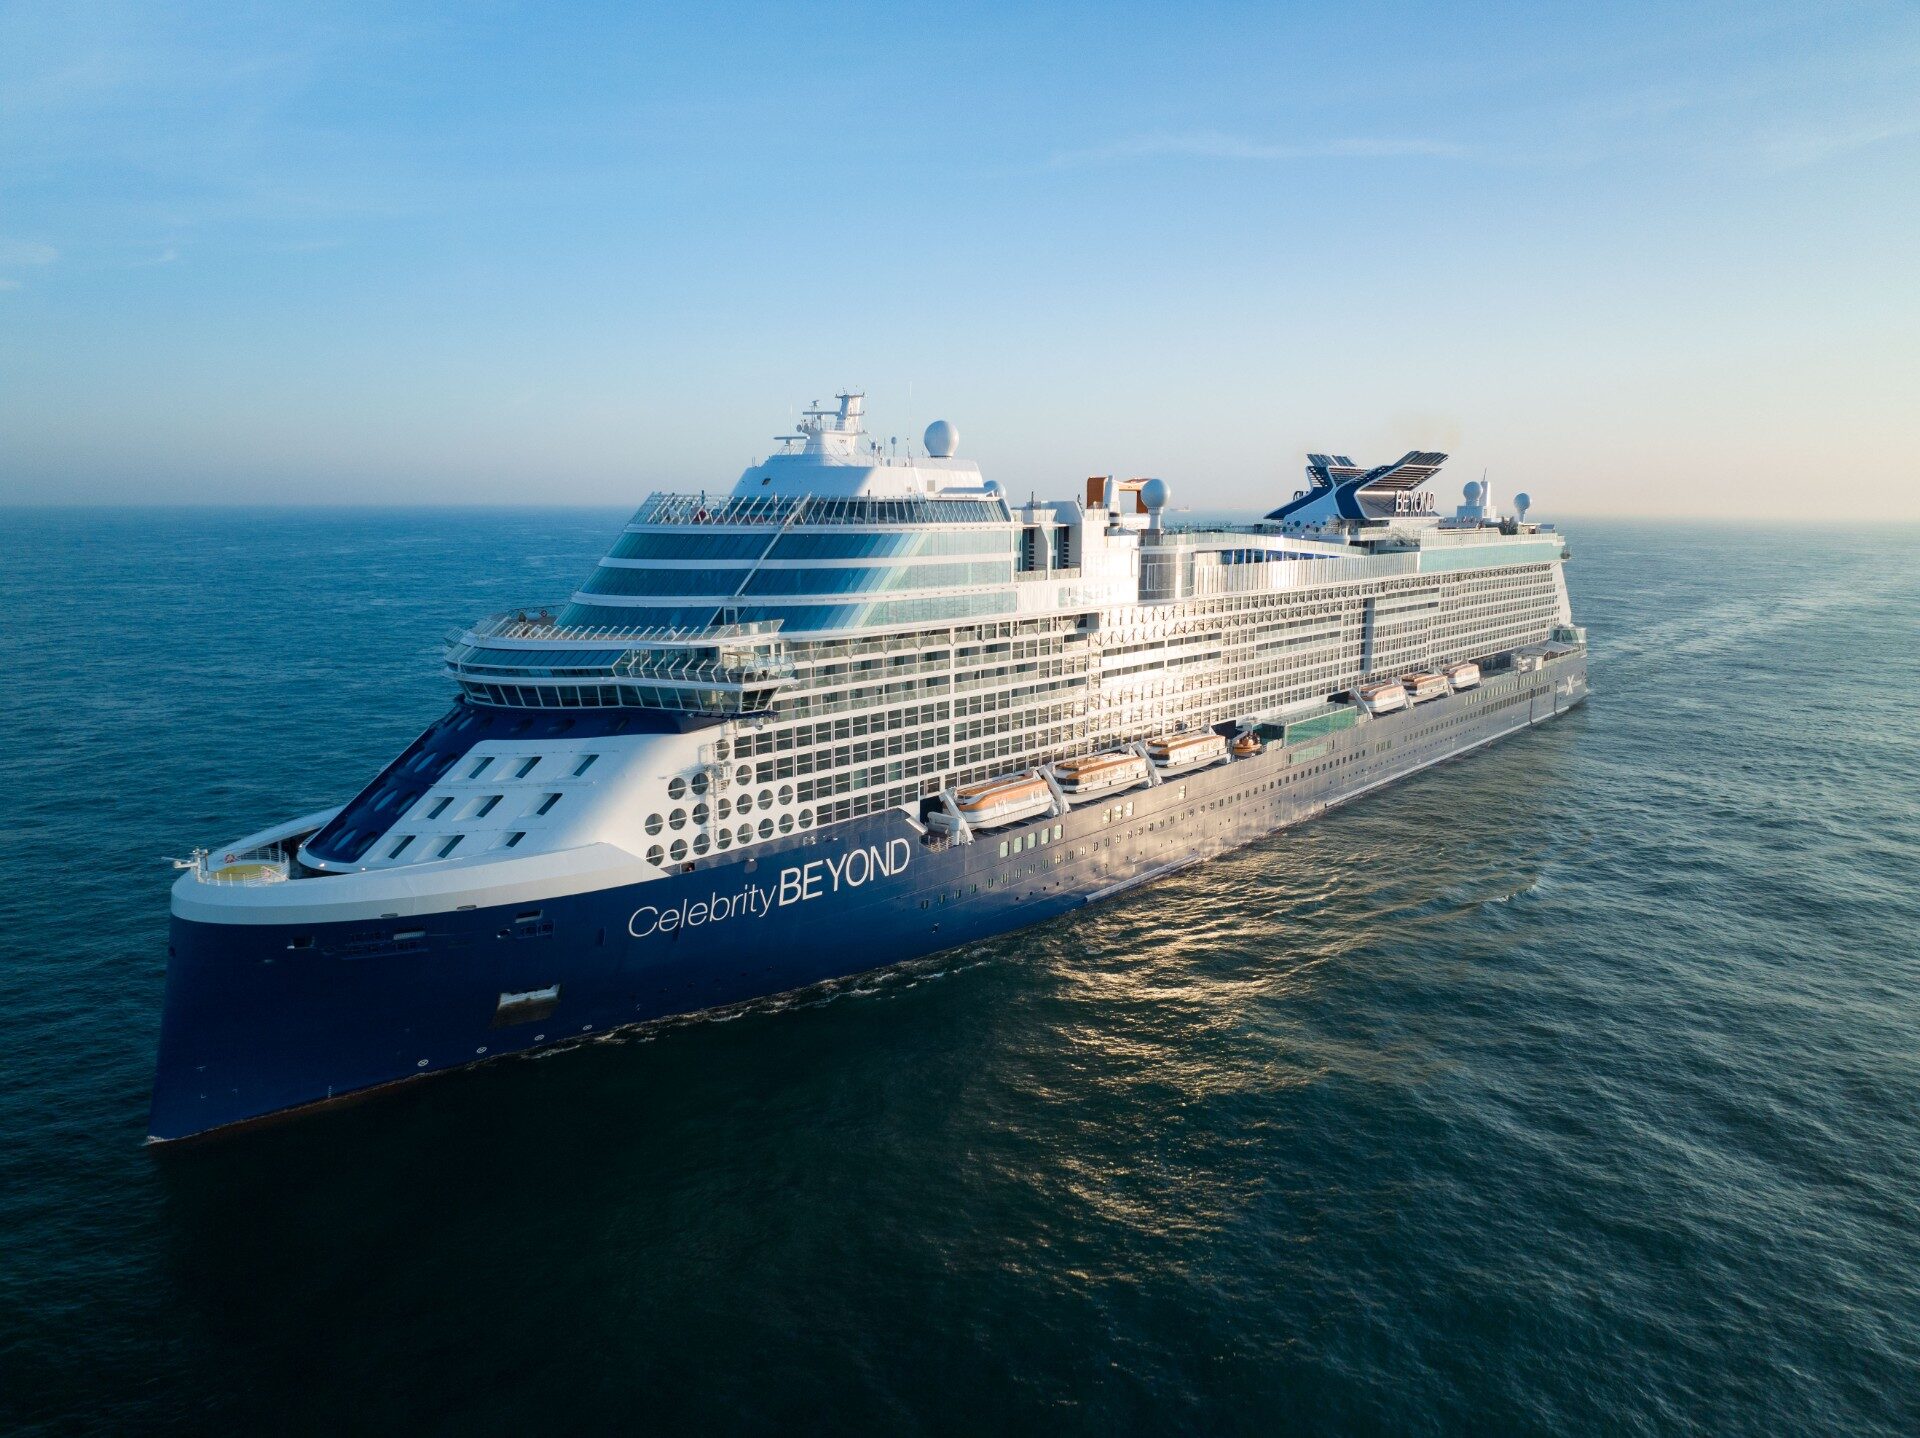 Insider’s Guide to Celebrity Beyond | Celebrity Cruises